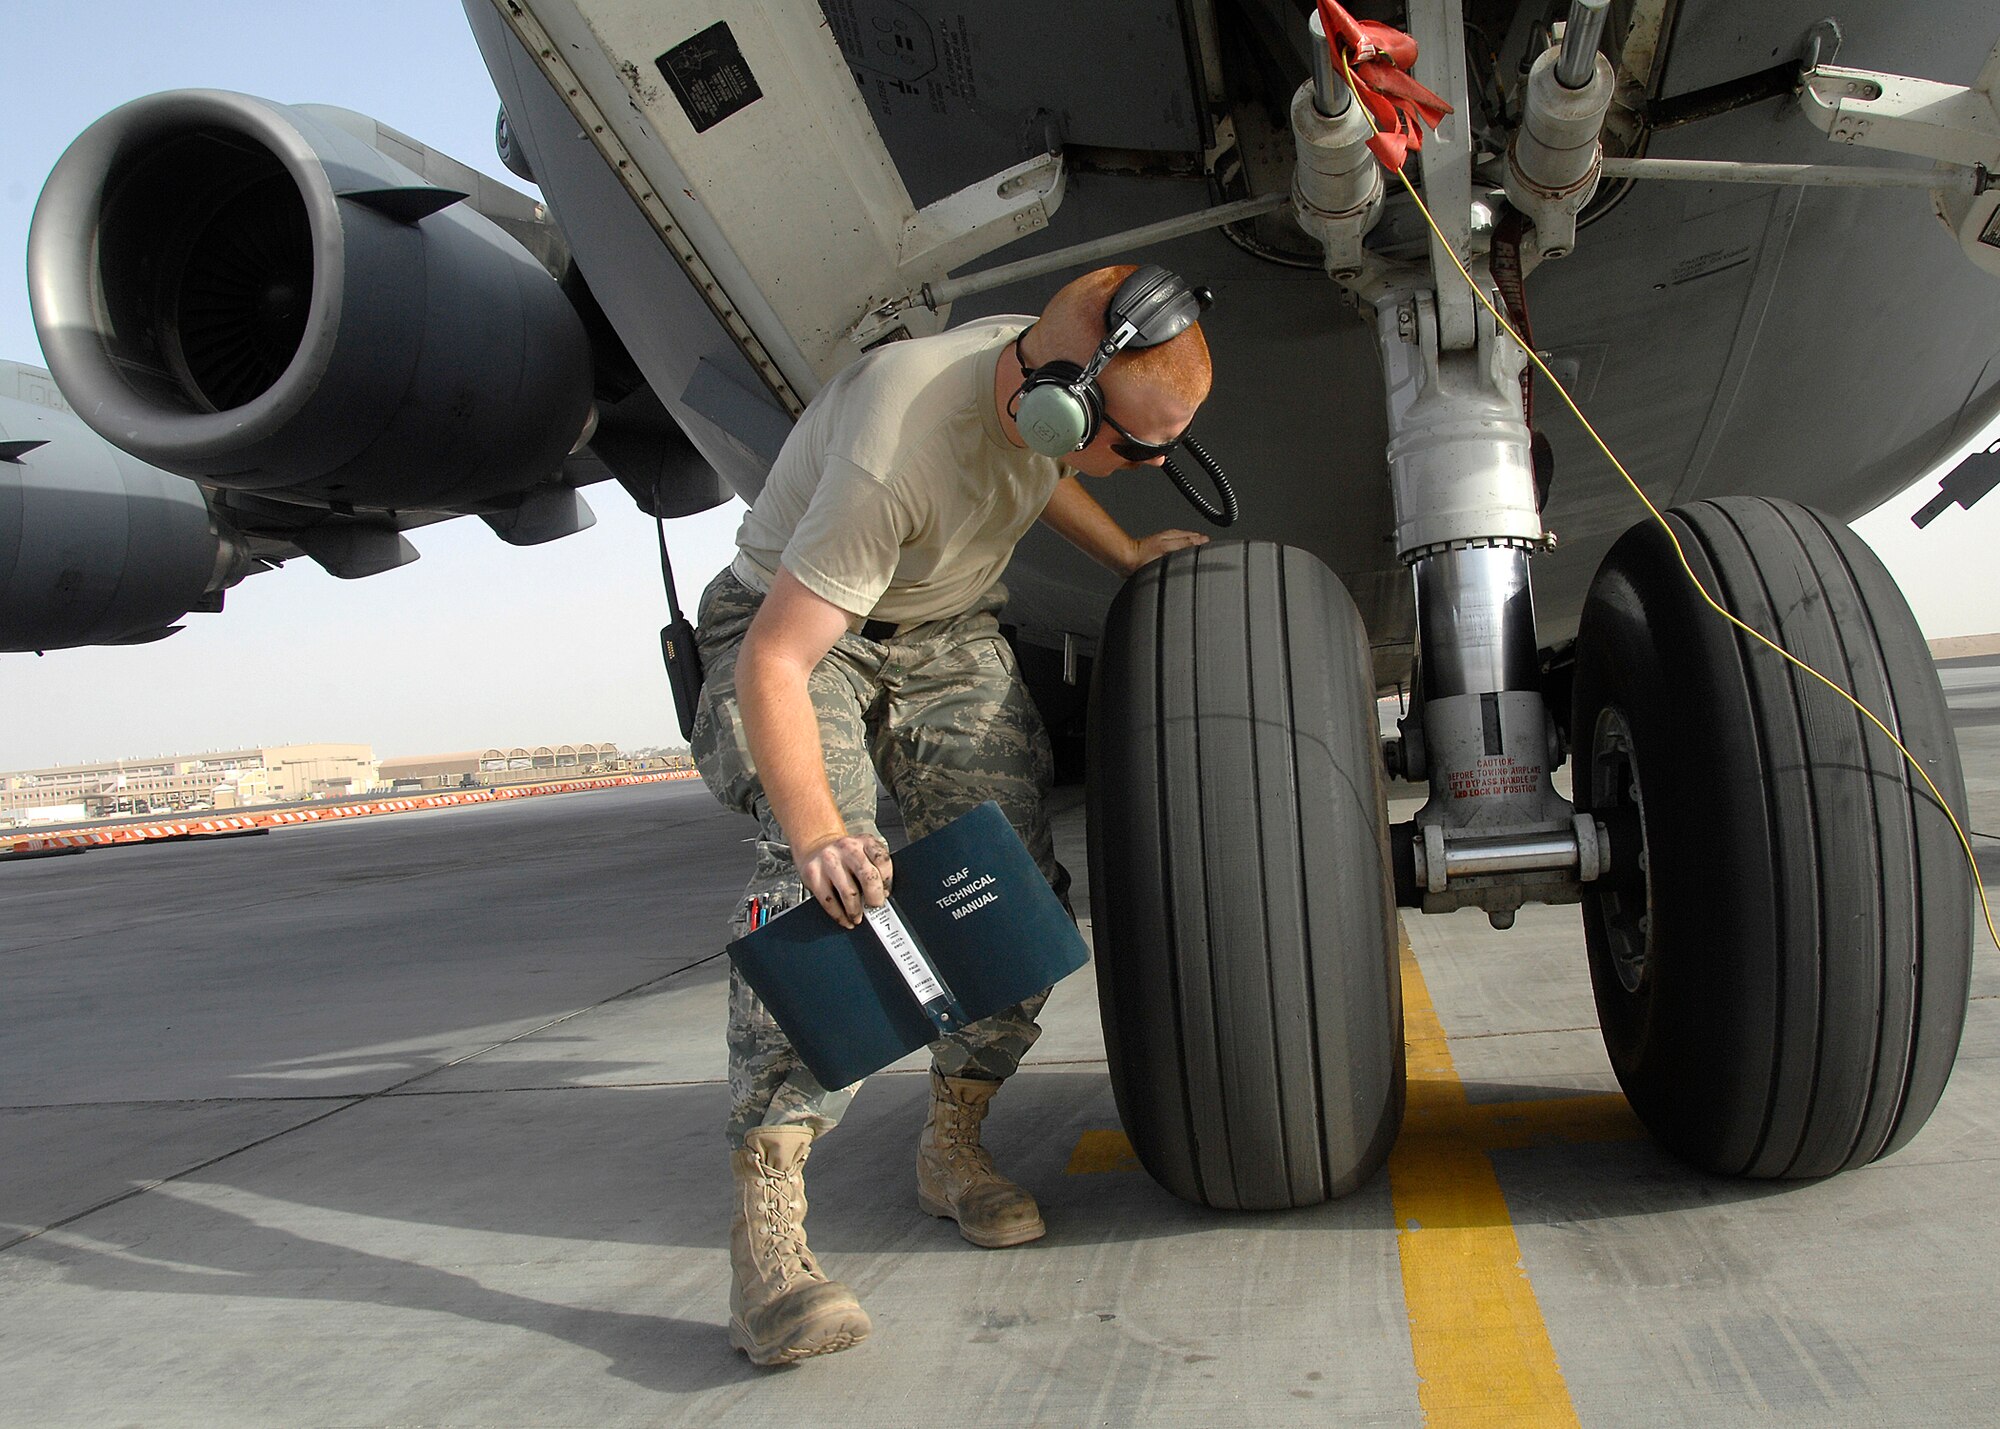 SOUTHWEST ASIA -- Airman 1st Class Michael Depue, 5th Expeditionary Aircraft Maintenance Squadron crew chief, conducts a tire inspection on a C-17 Globemaster III aircraft on Nov. 26 at an air base in Southwest Asia. The 5 EAMS performs maintenance on C-5 Galaxy and C-17 aircraft deployed in support of Operations Iraqi Freedom and Enduring Freedom. Airman Depue is deployed from McCord Air Force Base, Wash. (U.S. Air Force photo/Tech. Sgt. Raheem Moore)